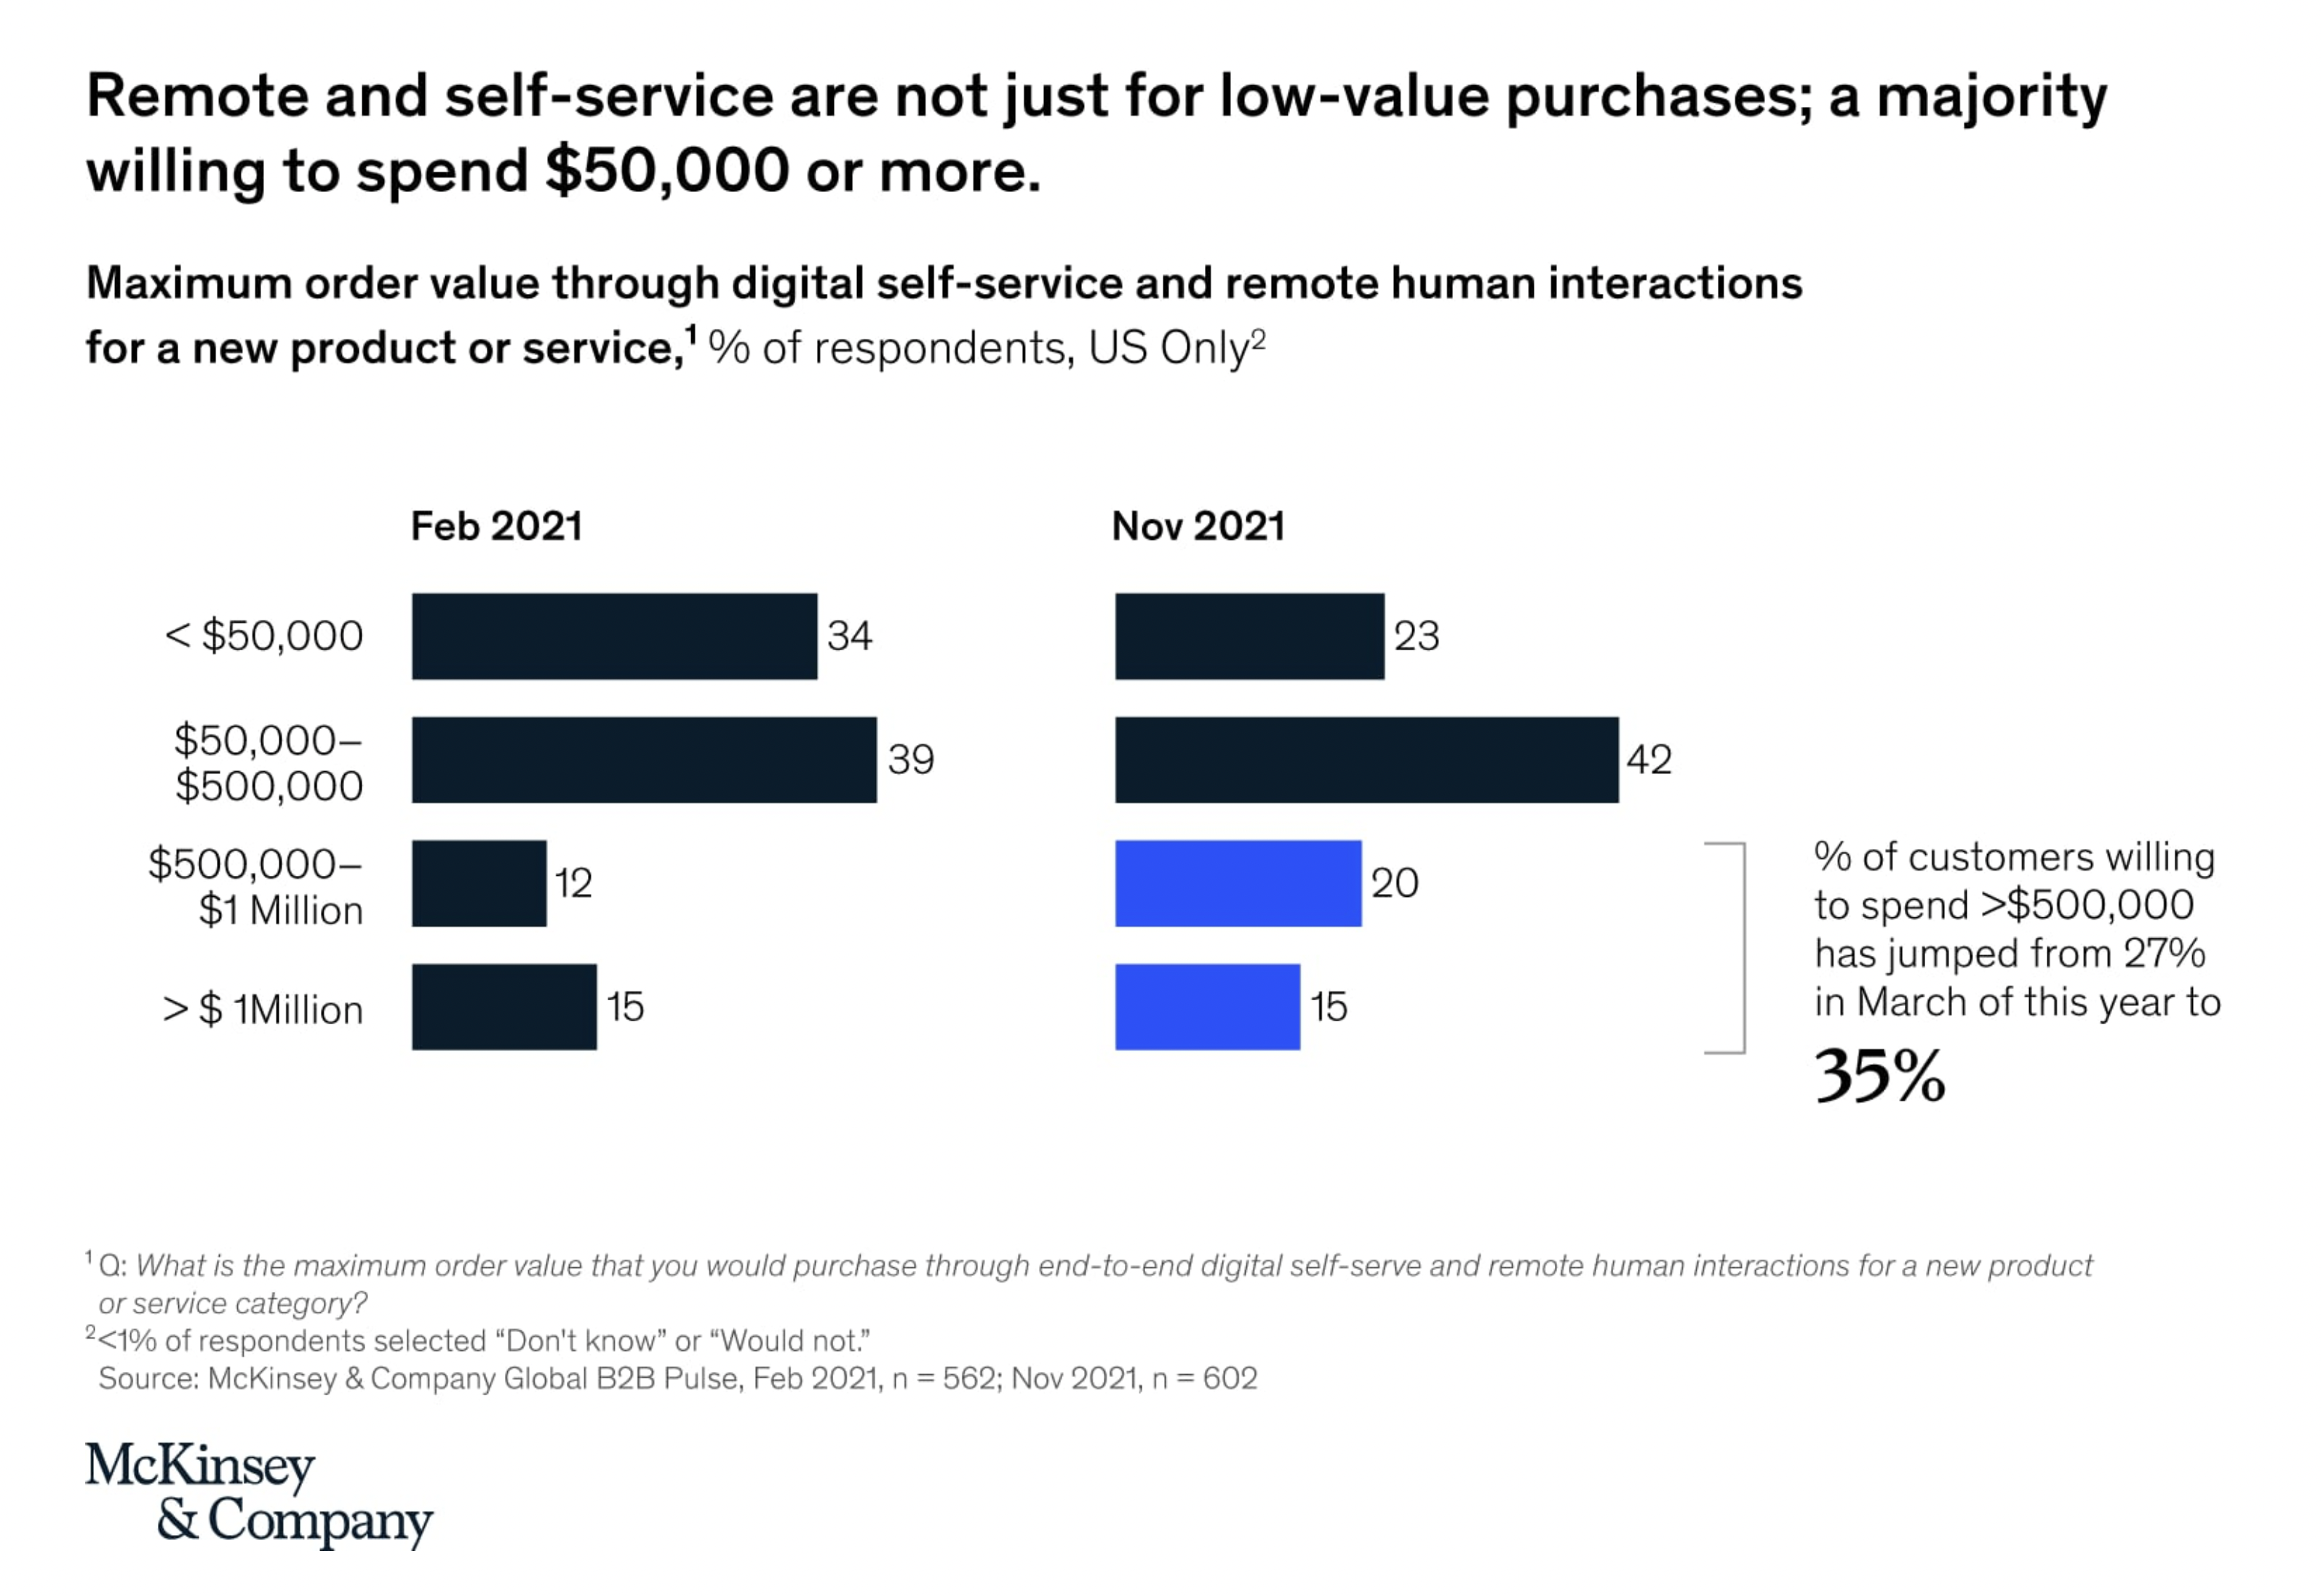 B2B Commerce: Digital Self-Service and Remote Human Interactions